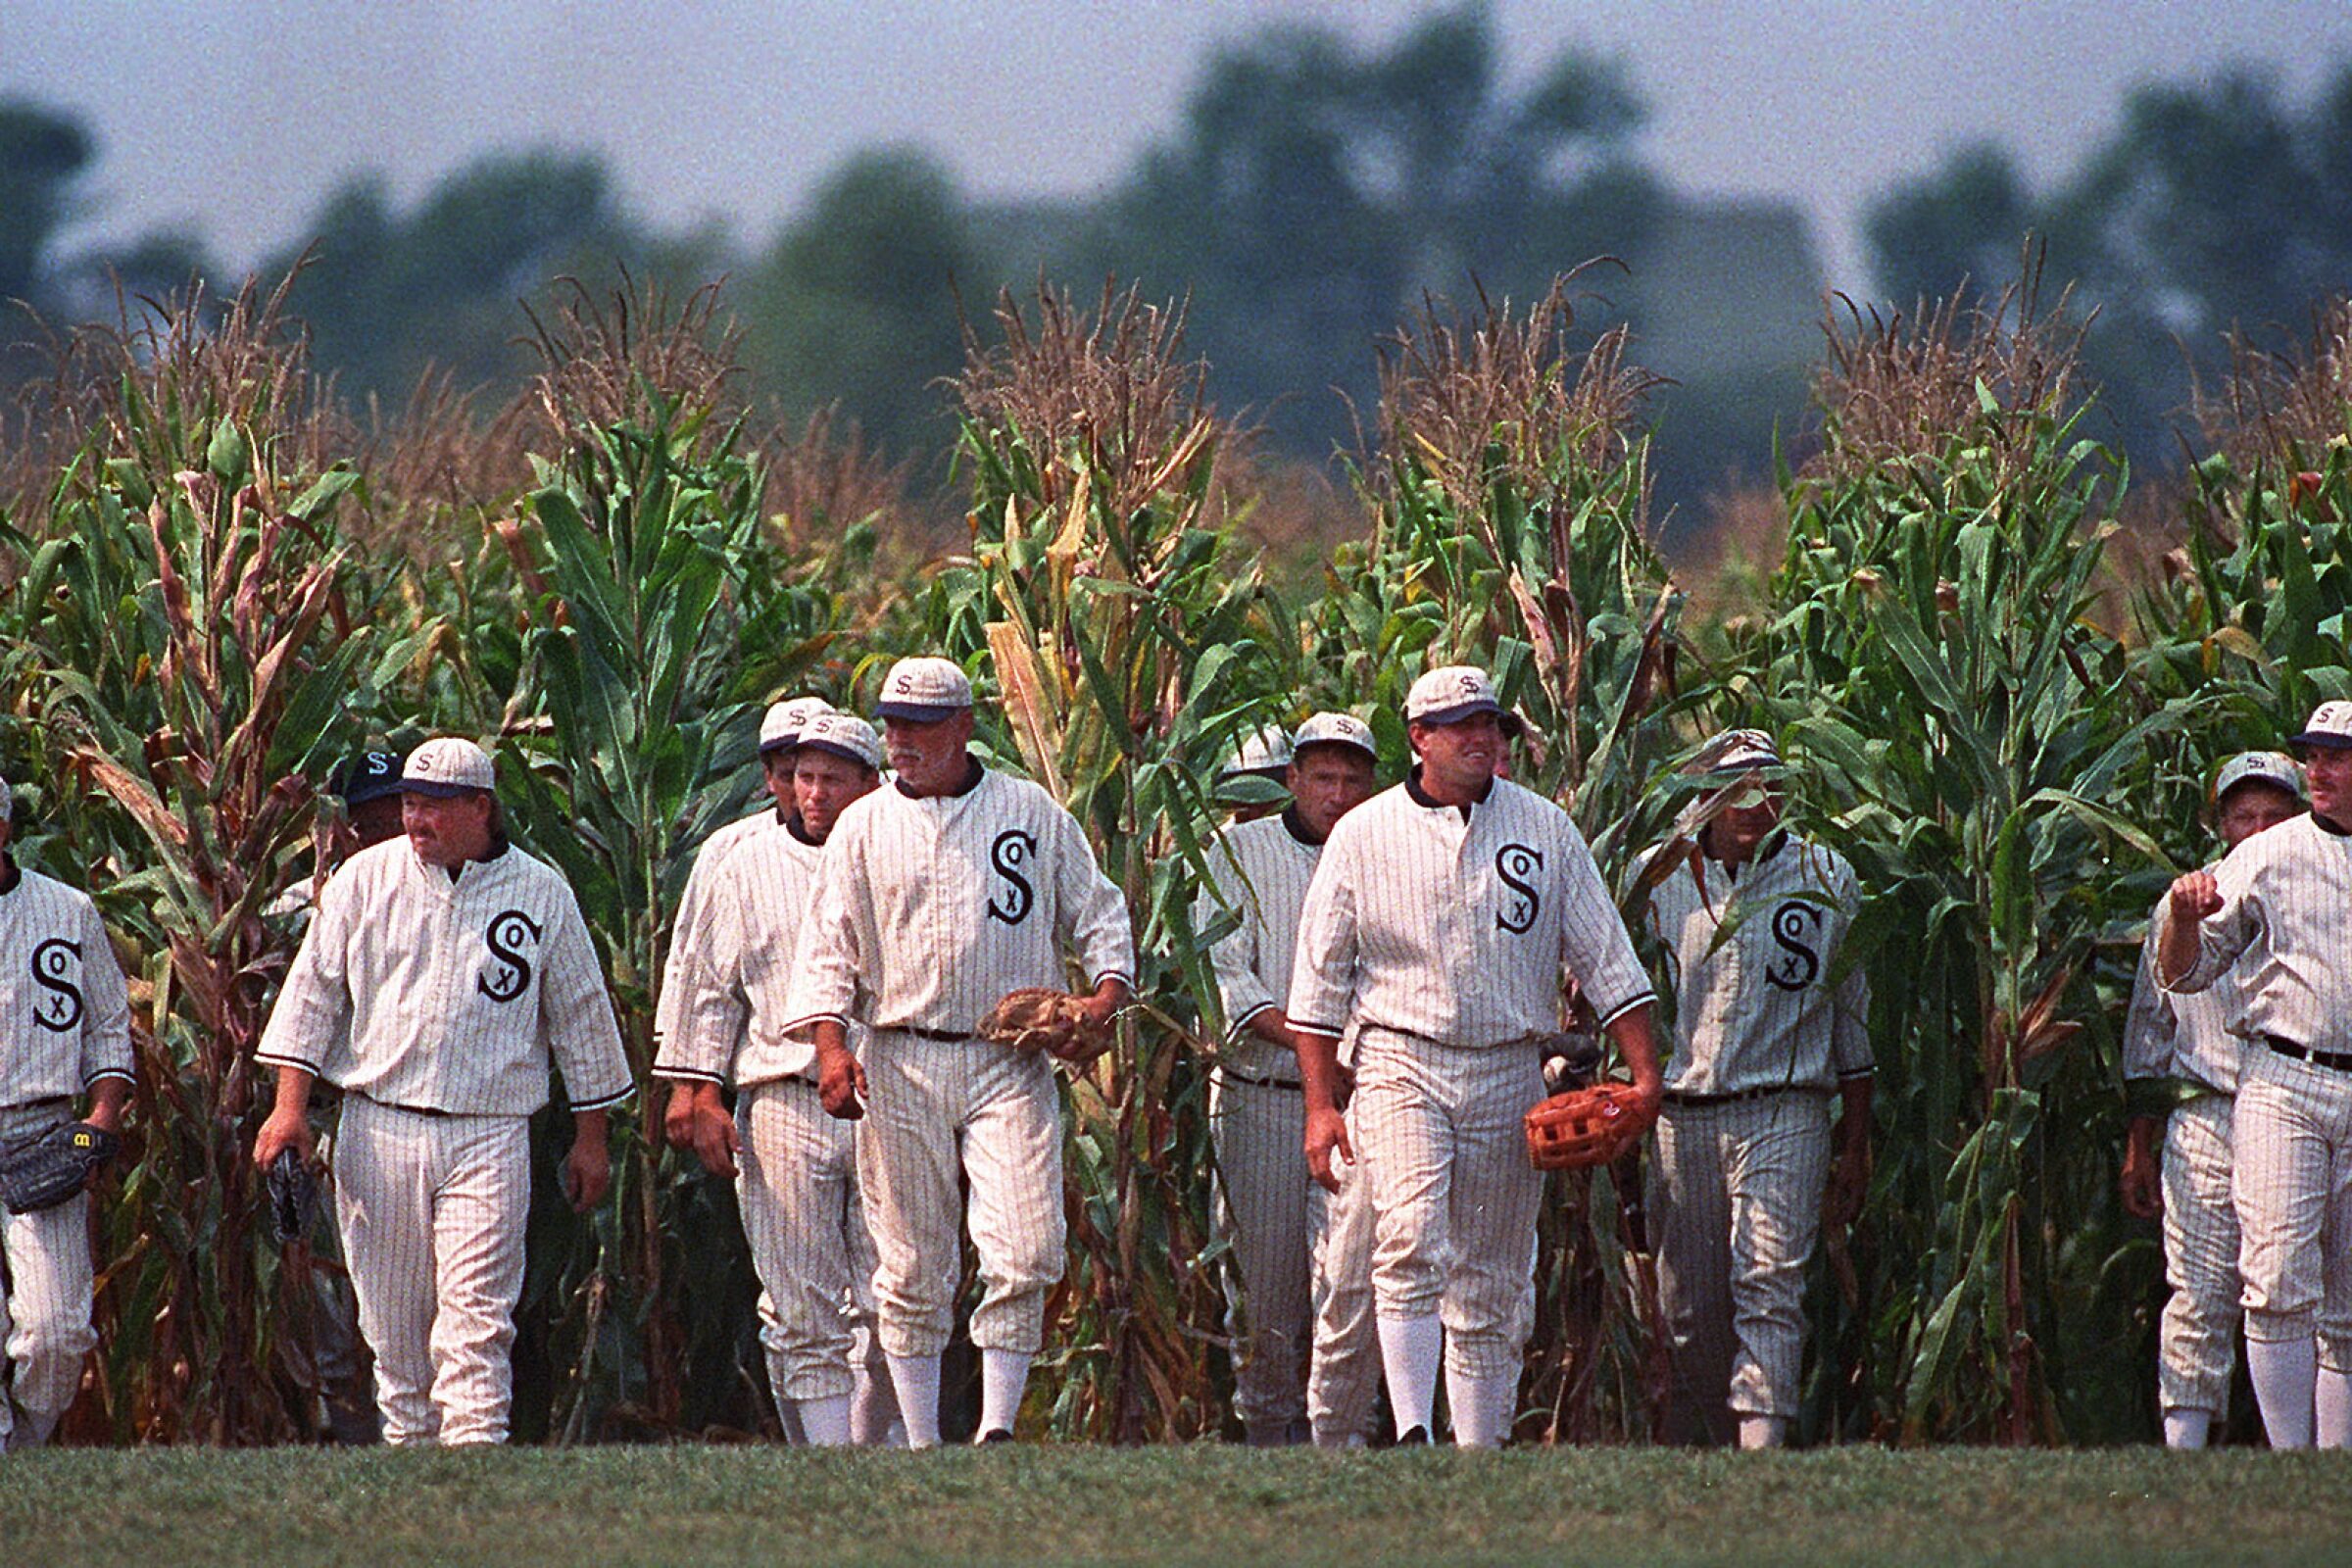 Actors portraying ghost baseball players emerge from the cornfield at the "Field of Dreams" movie site in Iowa. 